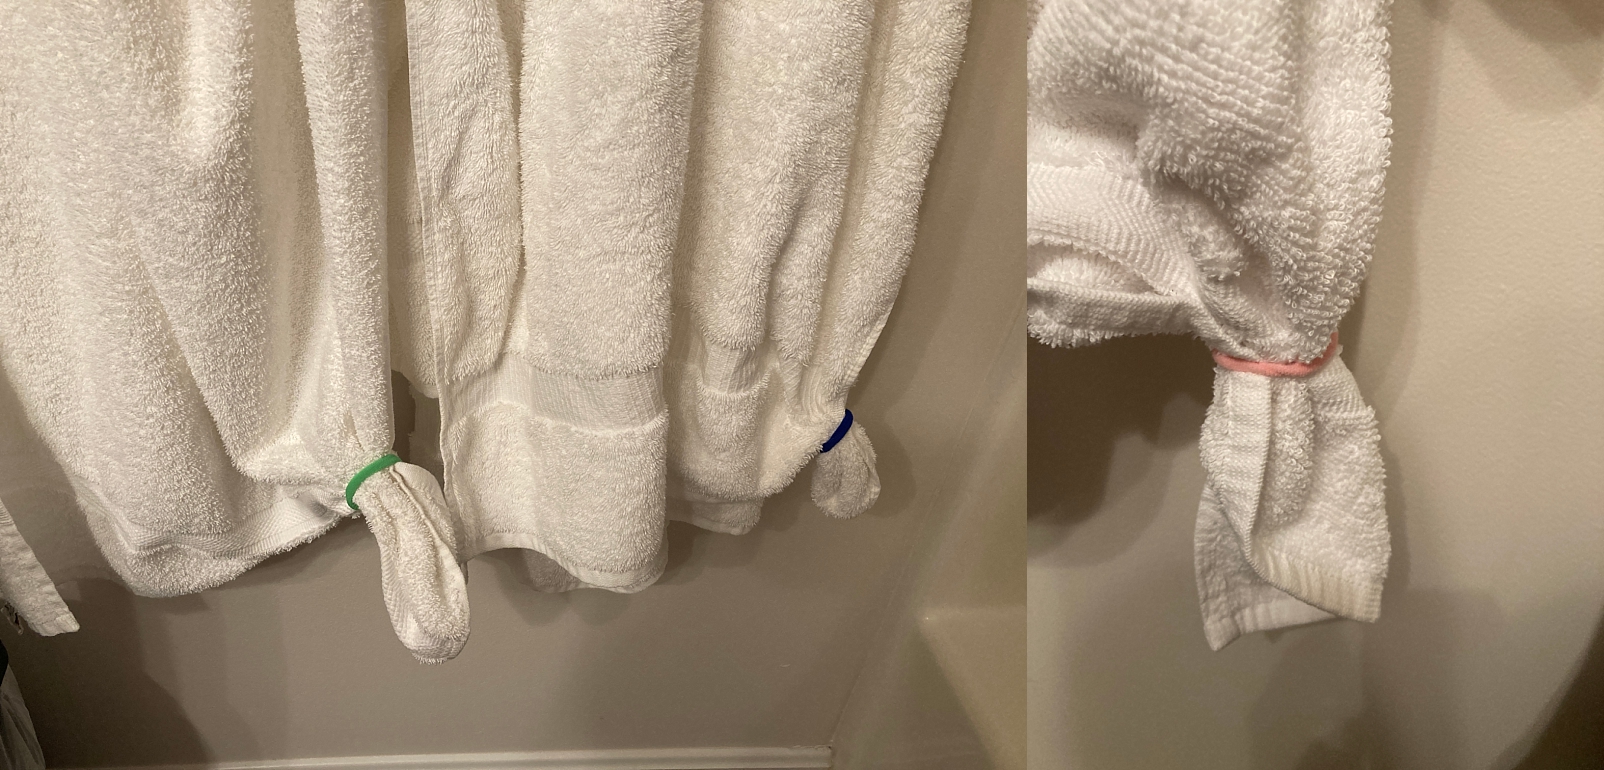 color hair ties on towels to tell them apart